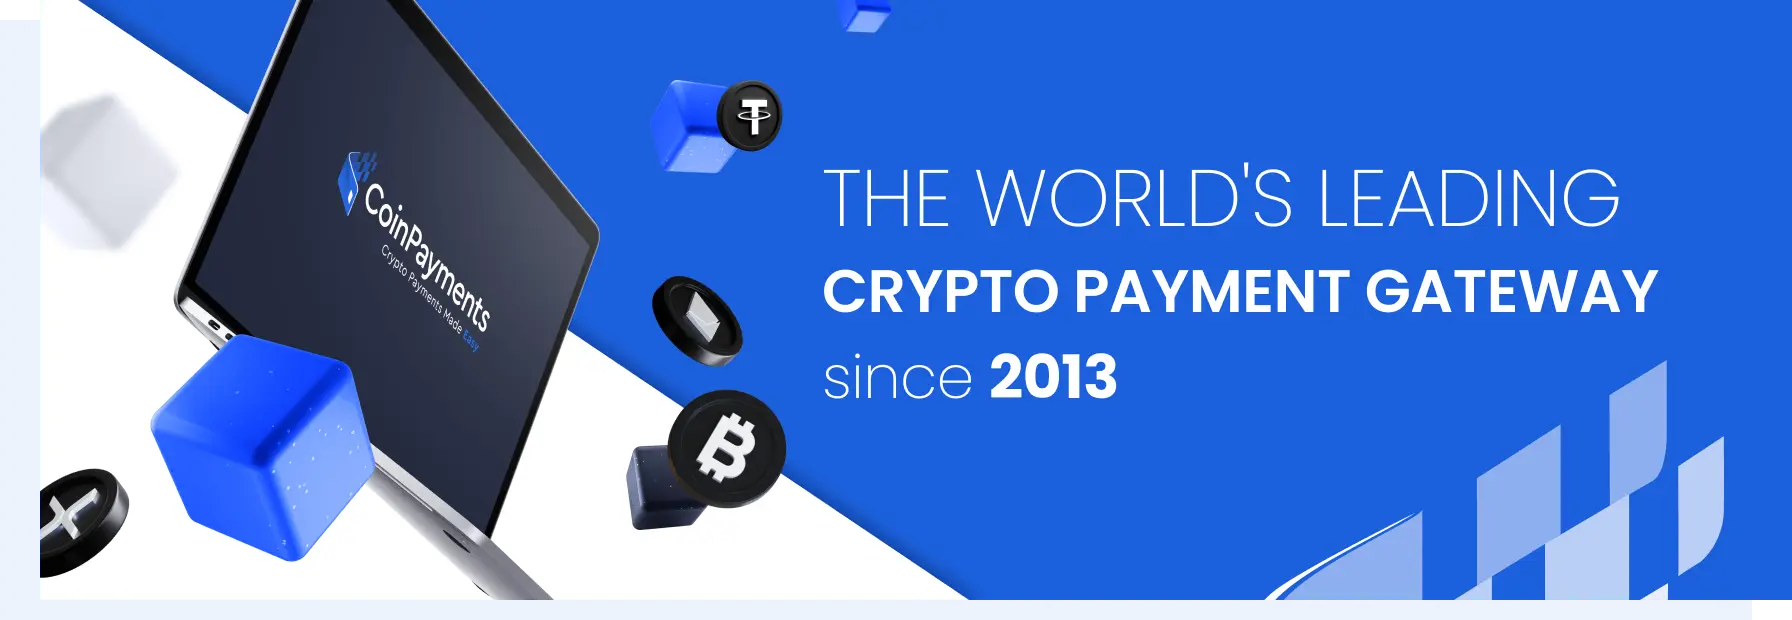 coinpayments worlds leading crypto payment gateway